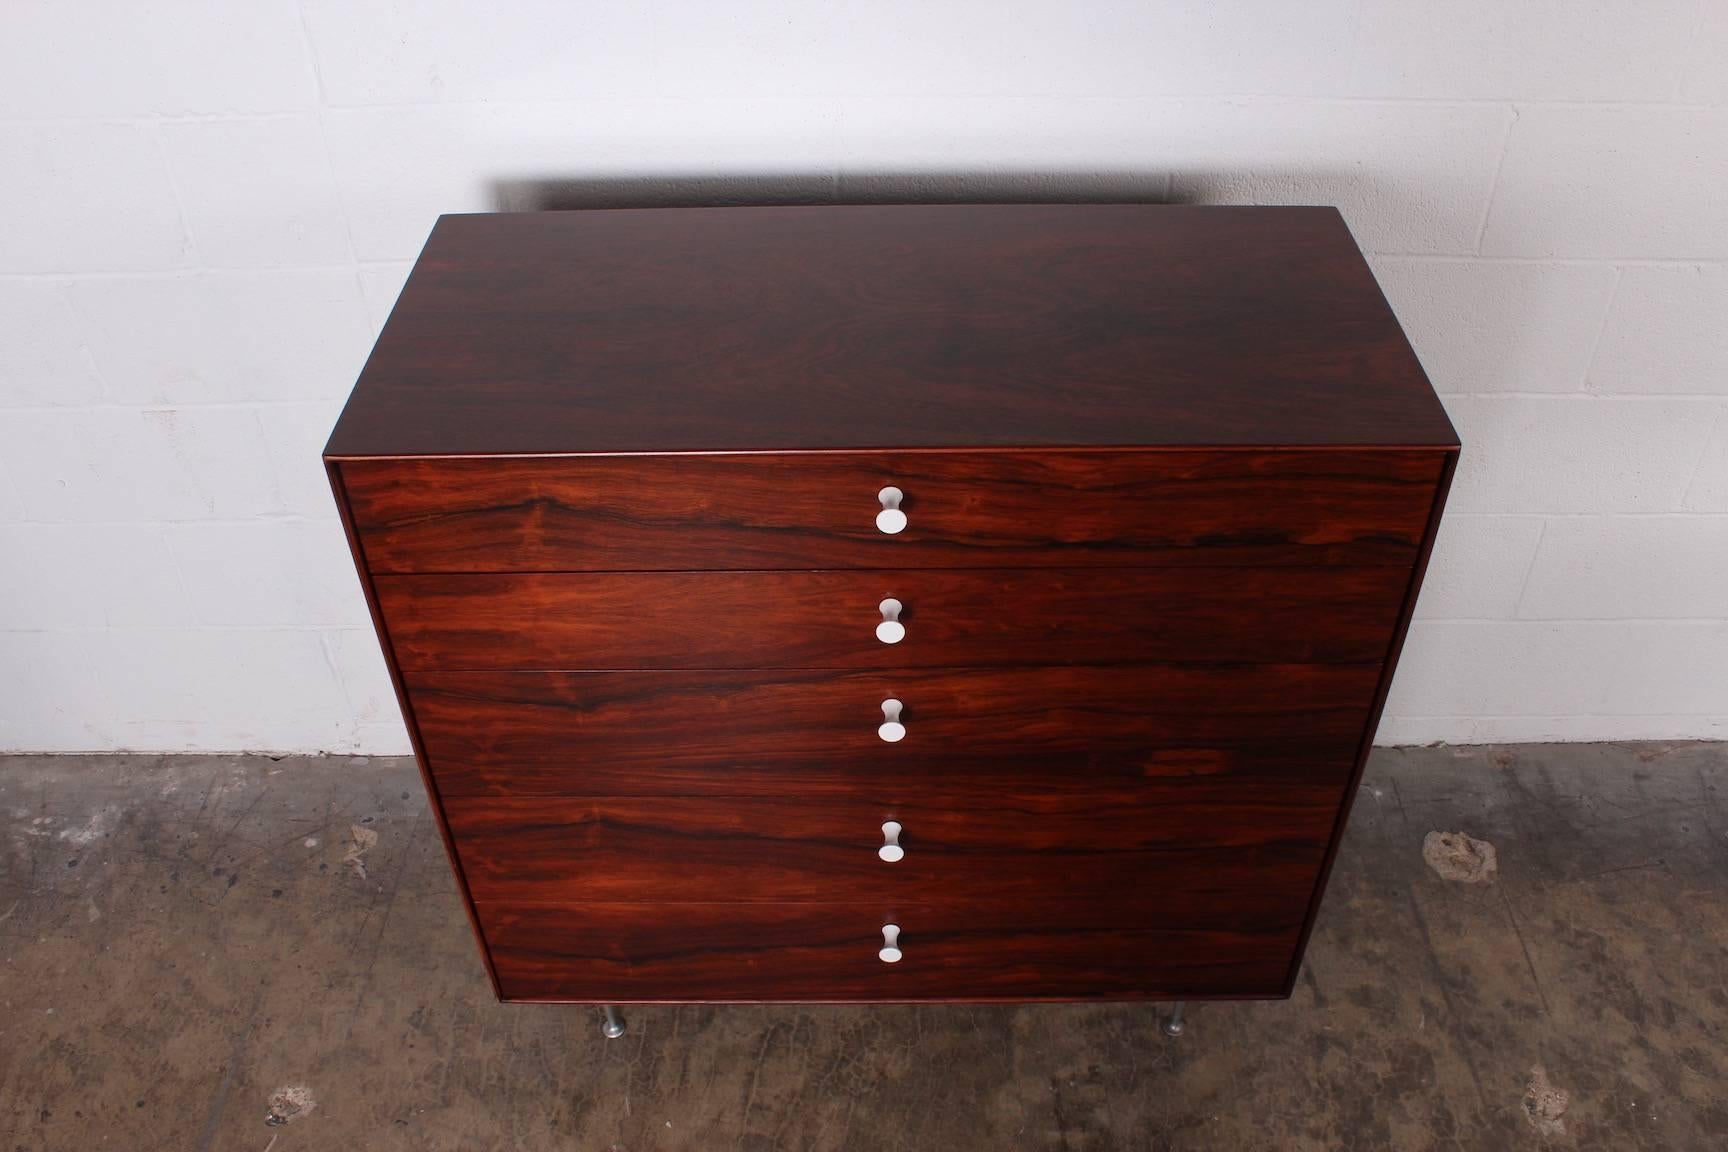 A beautifully grained rosewood thin edge dresser designed by George Nelson for Herman Miller.